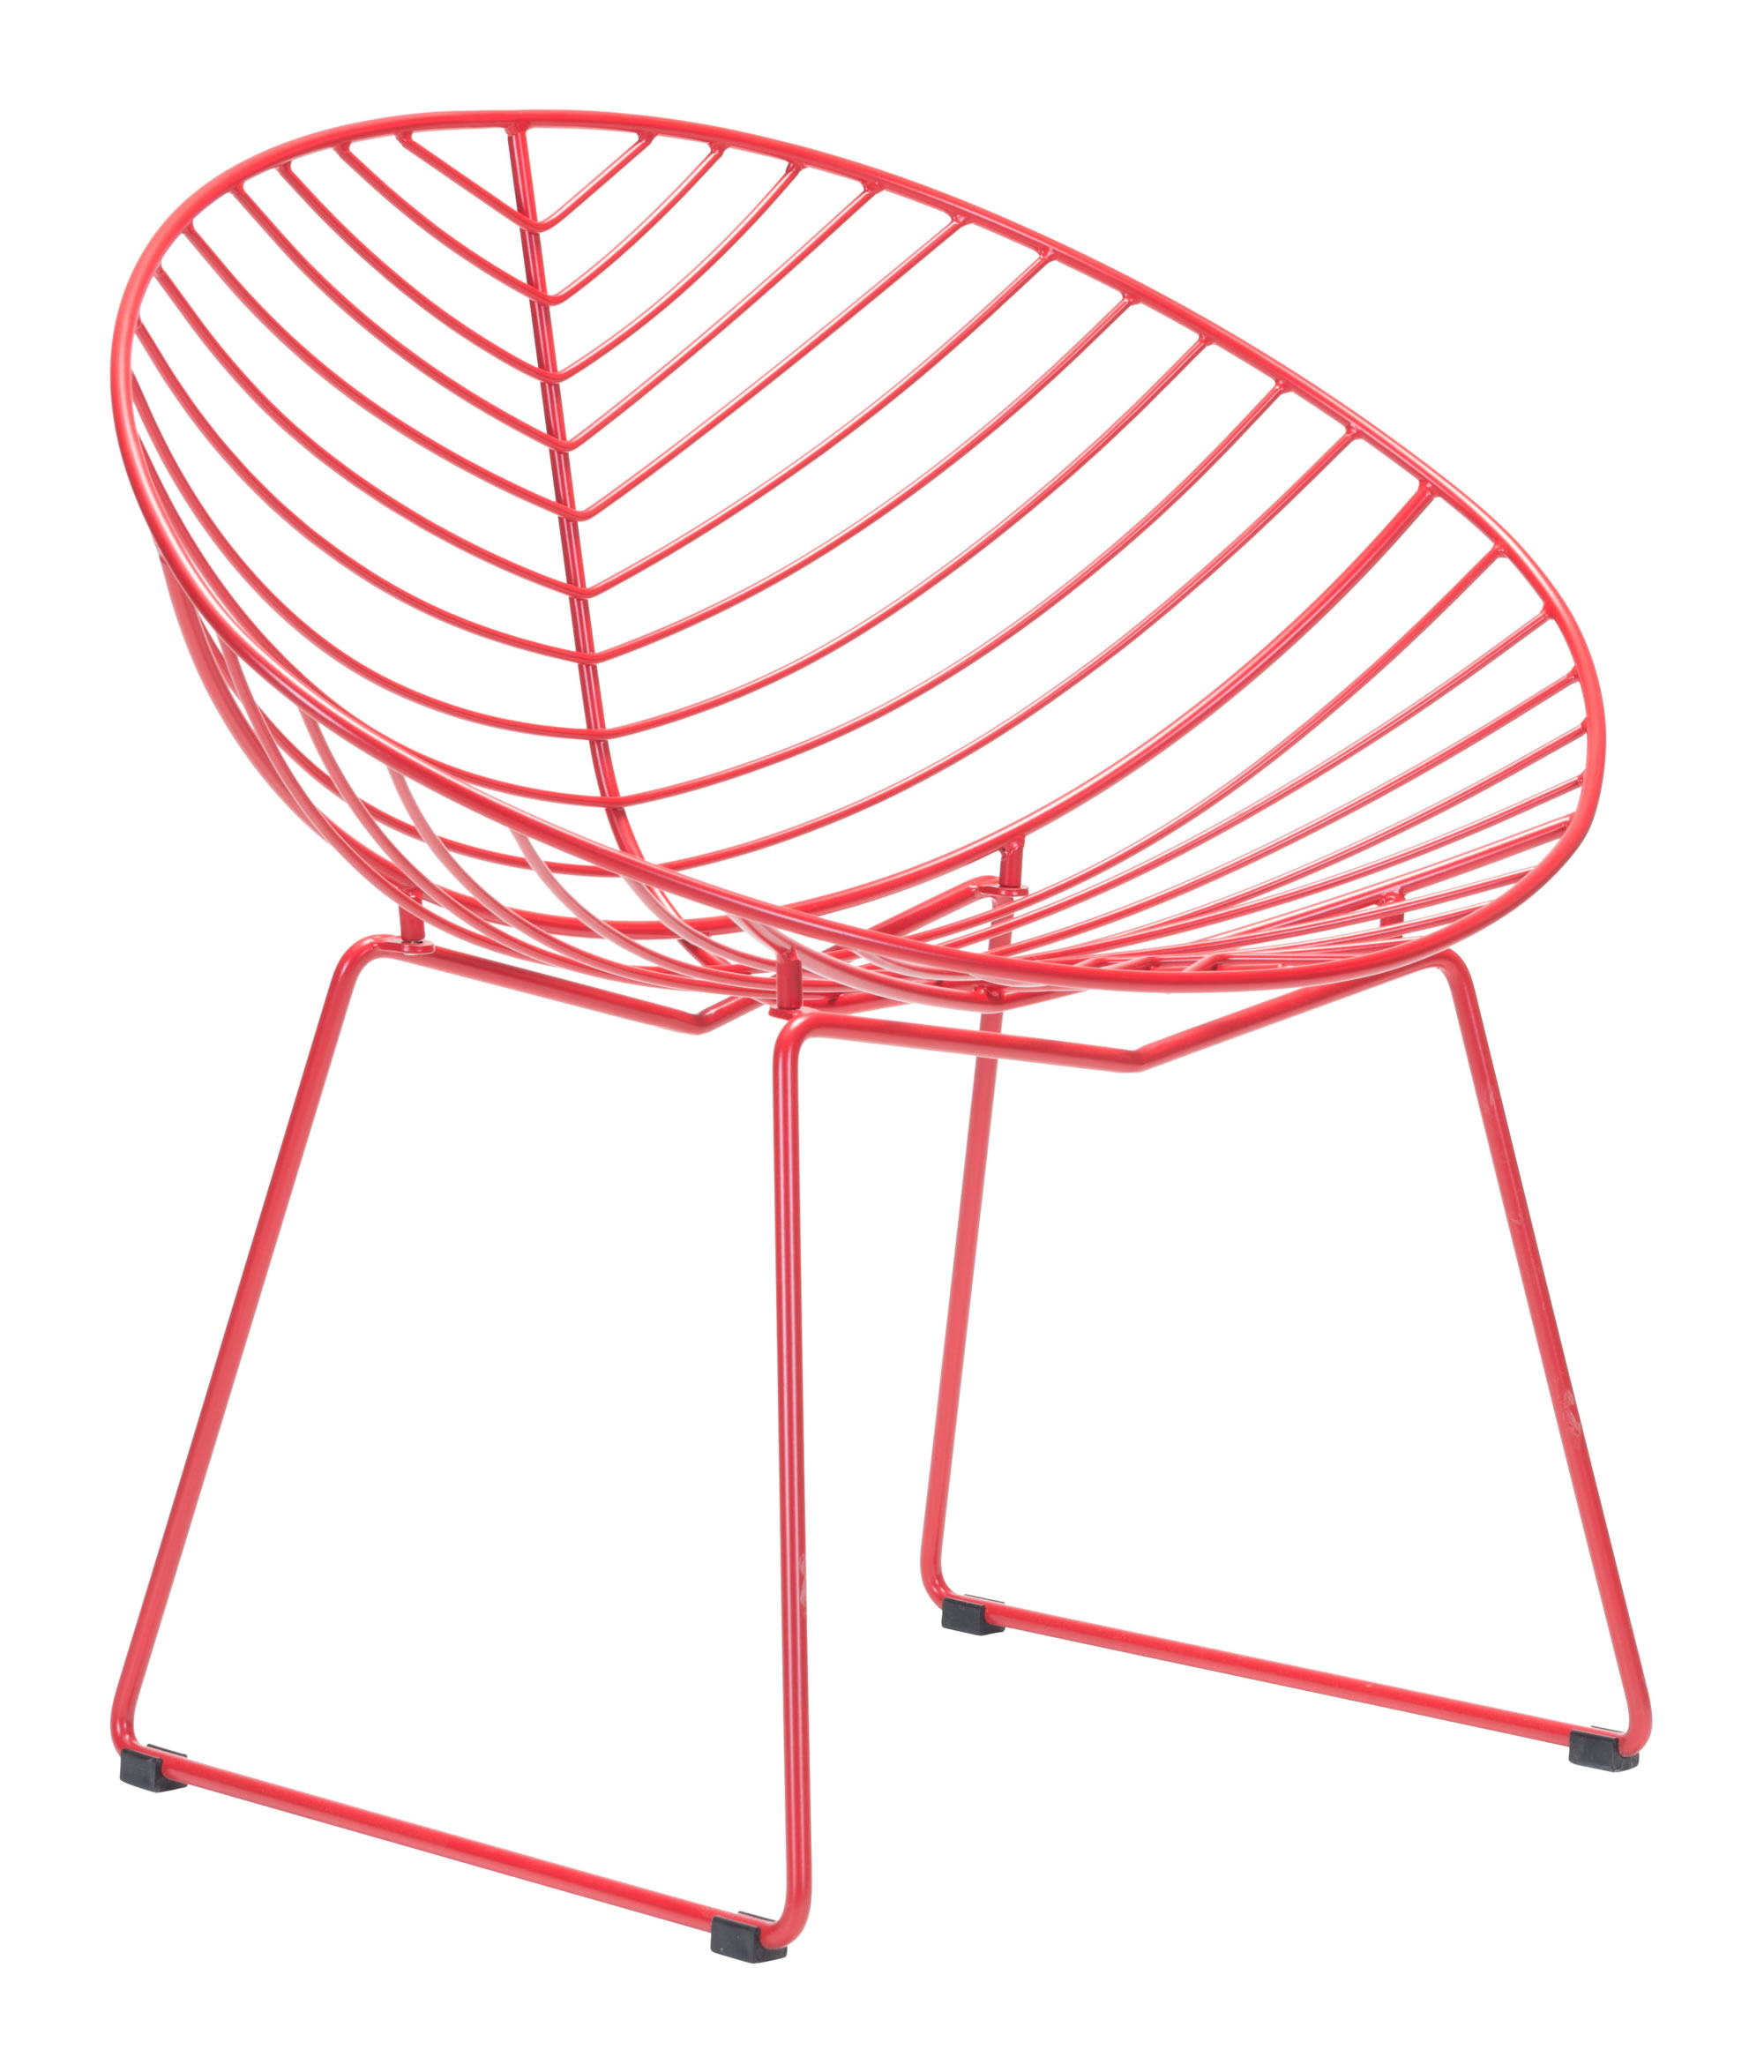 33.9" x 22.4" x 32.1" Red, Steel, Outdoor Lounge Chair - Set of 2